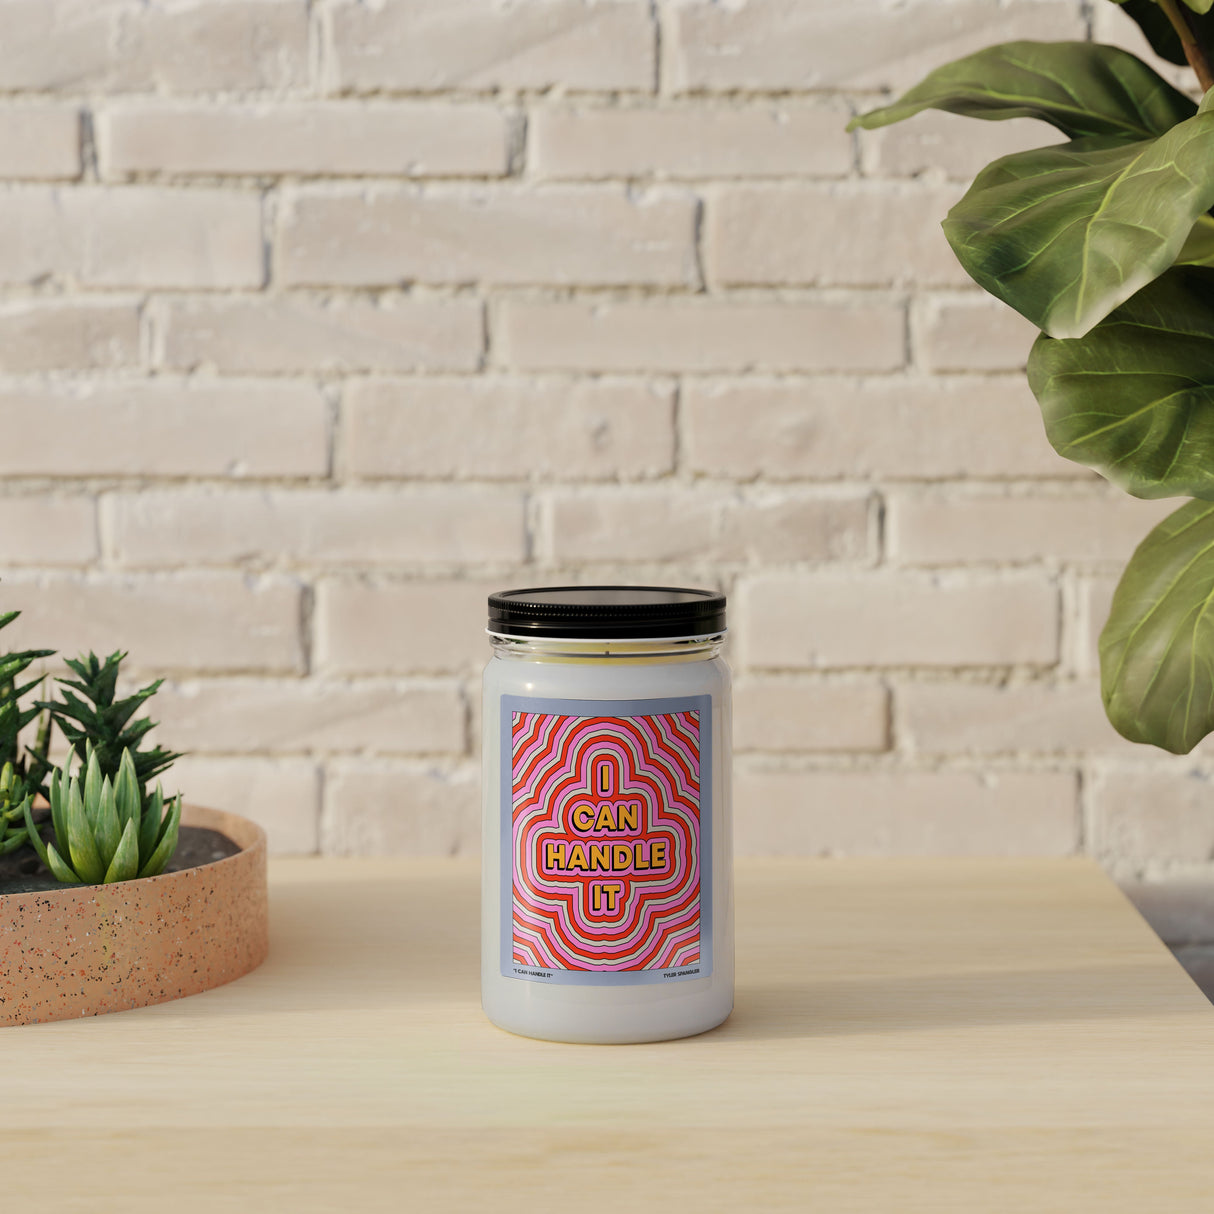 Tyler Spangler Scented Candle I I Can Handle It I Premium Scented Candle